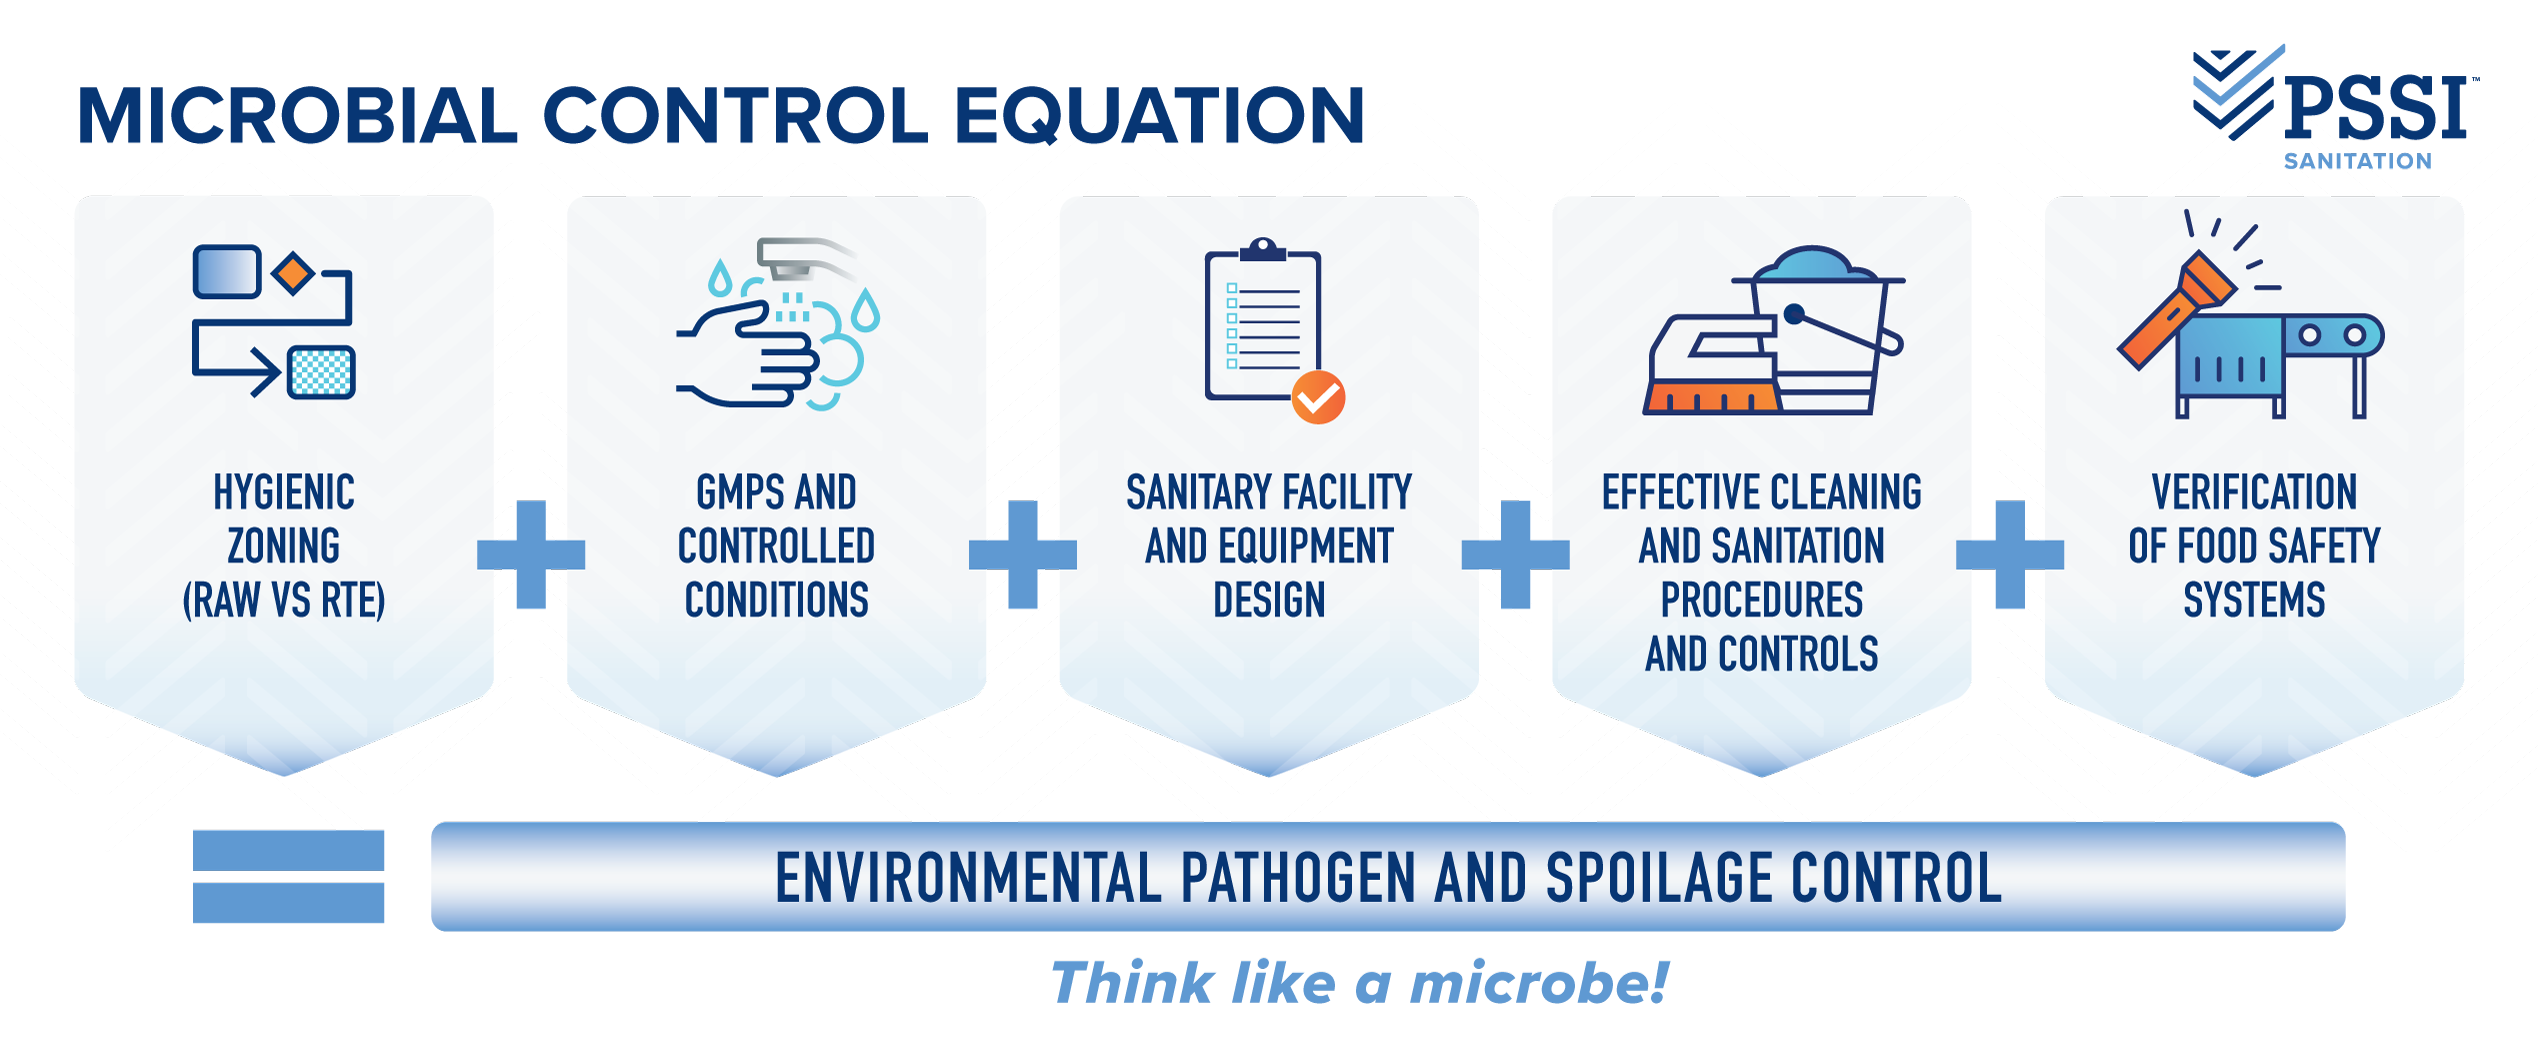 The Microbial Control Equation and the 8 Steps of Sanitation – Protecting Consumers and Brands